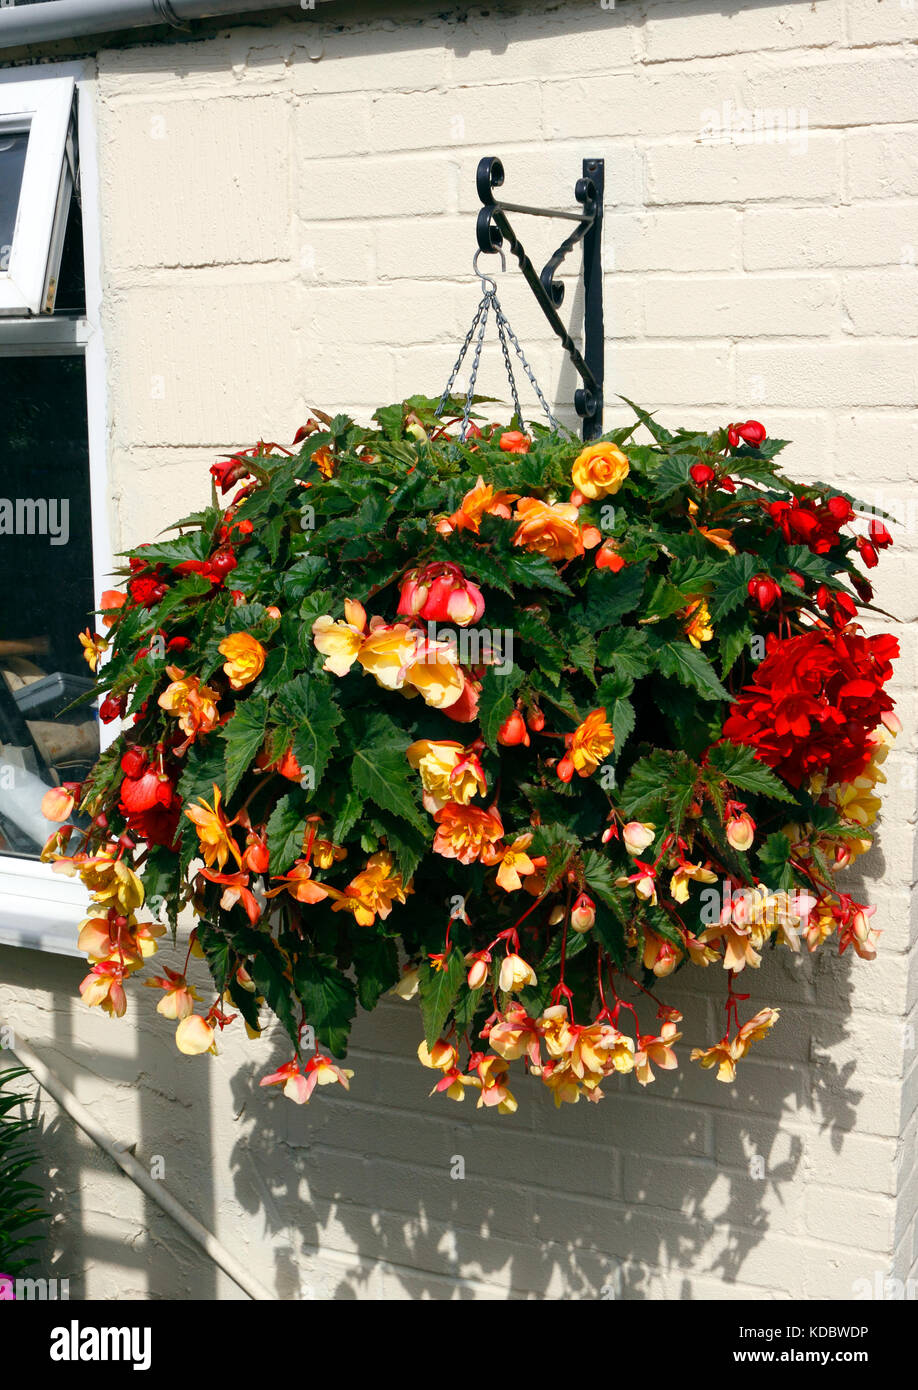 BEGONIA APRICOT SHADES IN A HANGING BASKET Stock Photo